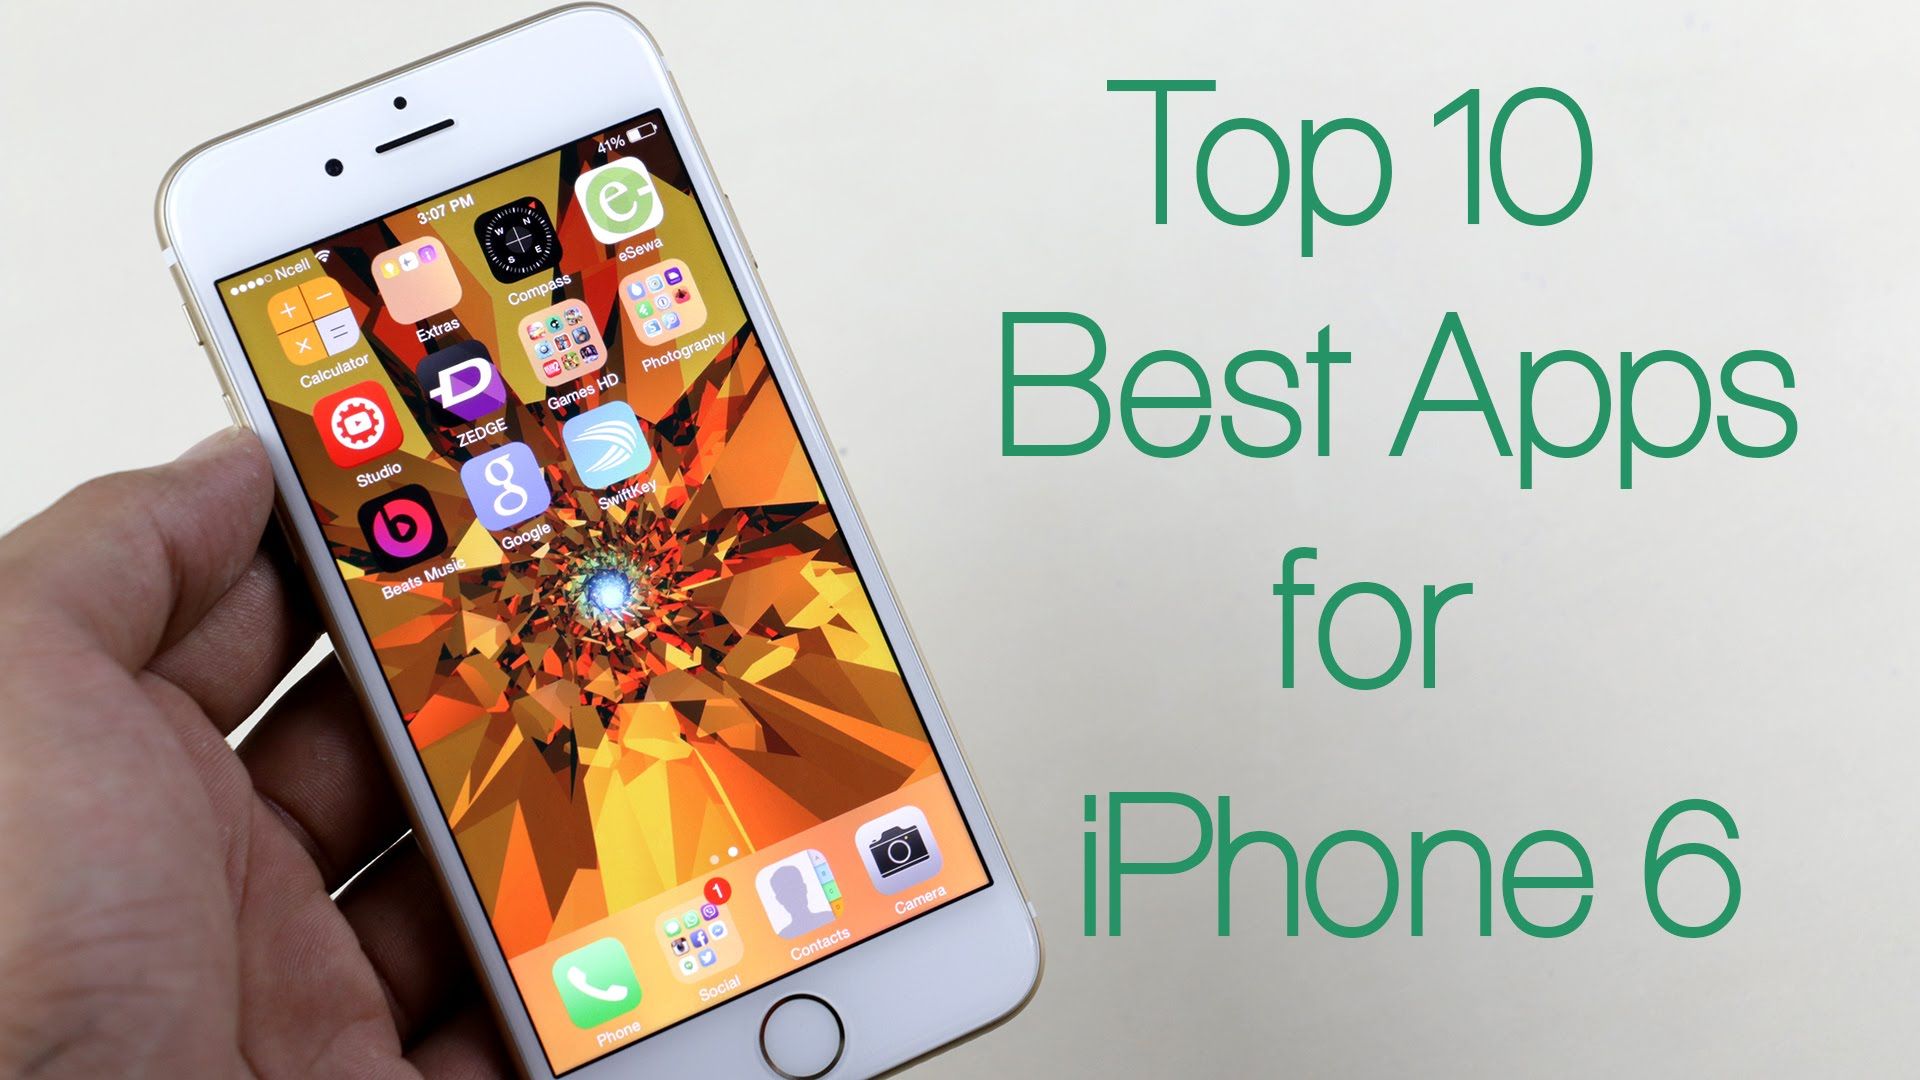 Top 10 Best Apps for iPhone 6 - YouTube